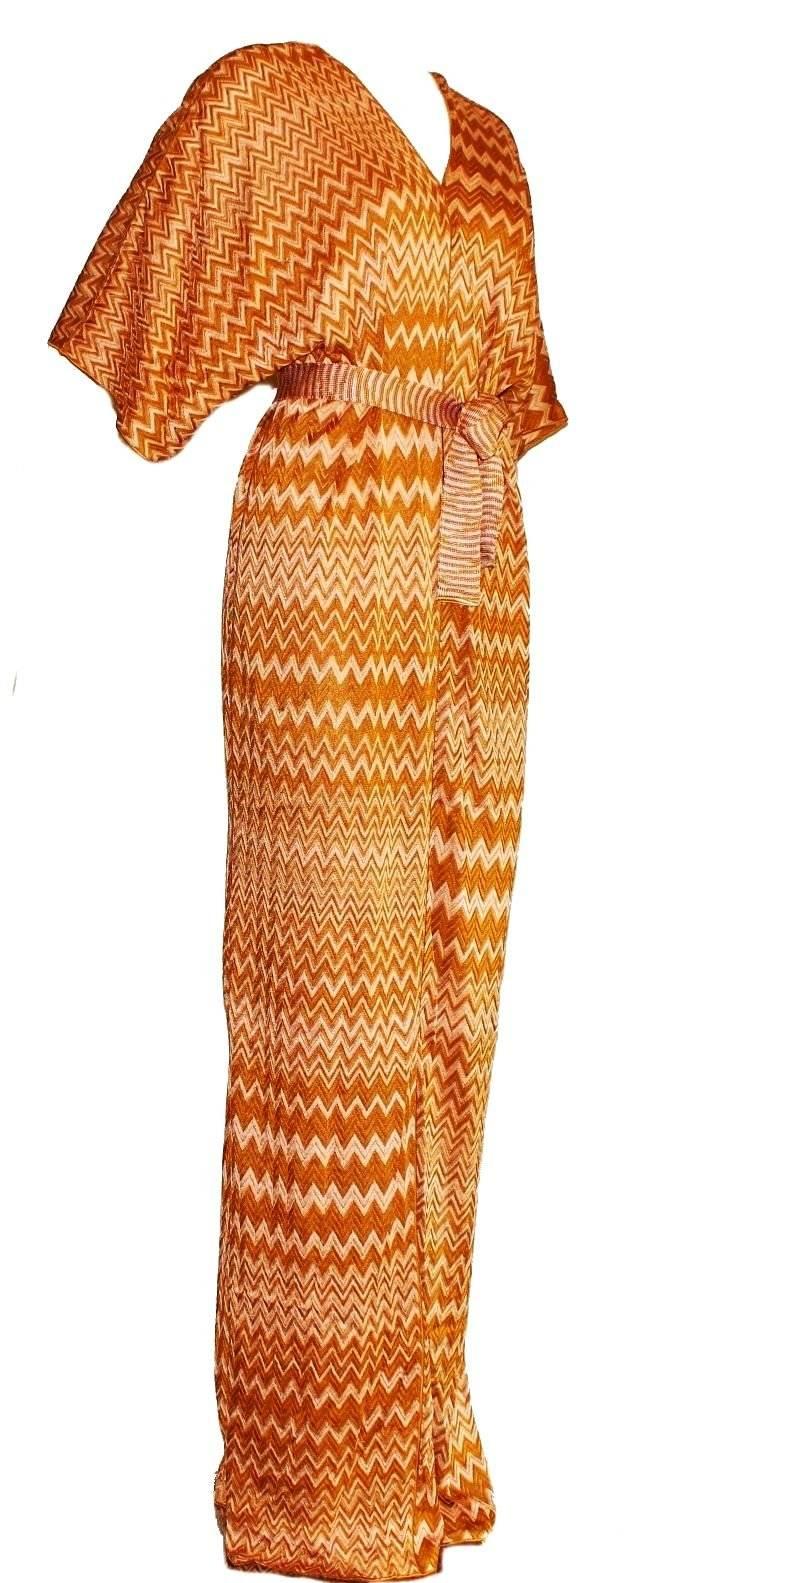 
BEAUTIFUL MISSONI ORANGE LABEL KNIT KAFTAN TUNIC DRESS COVERUP

 A CLASSIC MISSONI SIGNATURE PIECE THAT WILL LAST YOU FOR YEARS
DETAILS:

    Beautiful shades
    Classic MISSONI signature zigzag knit
    With matching belt
    Simply slips on
   